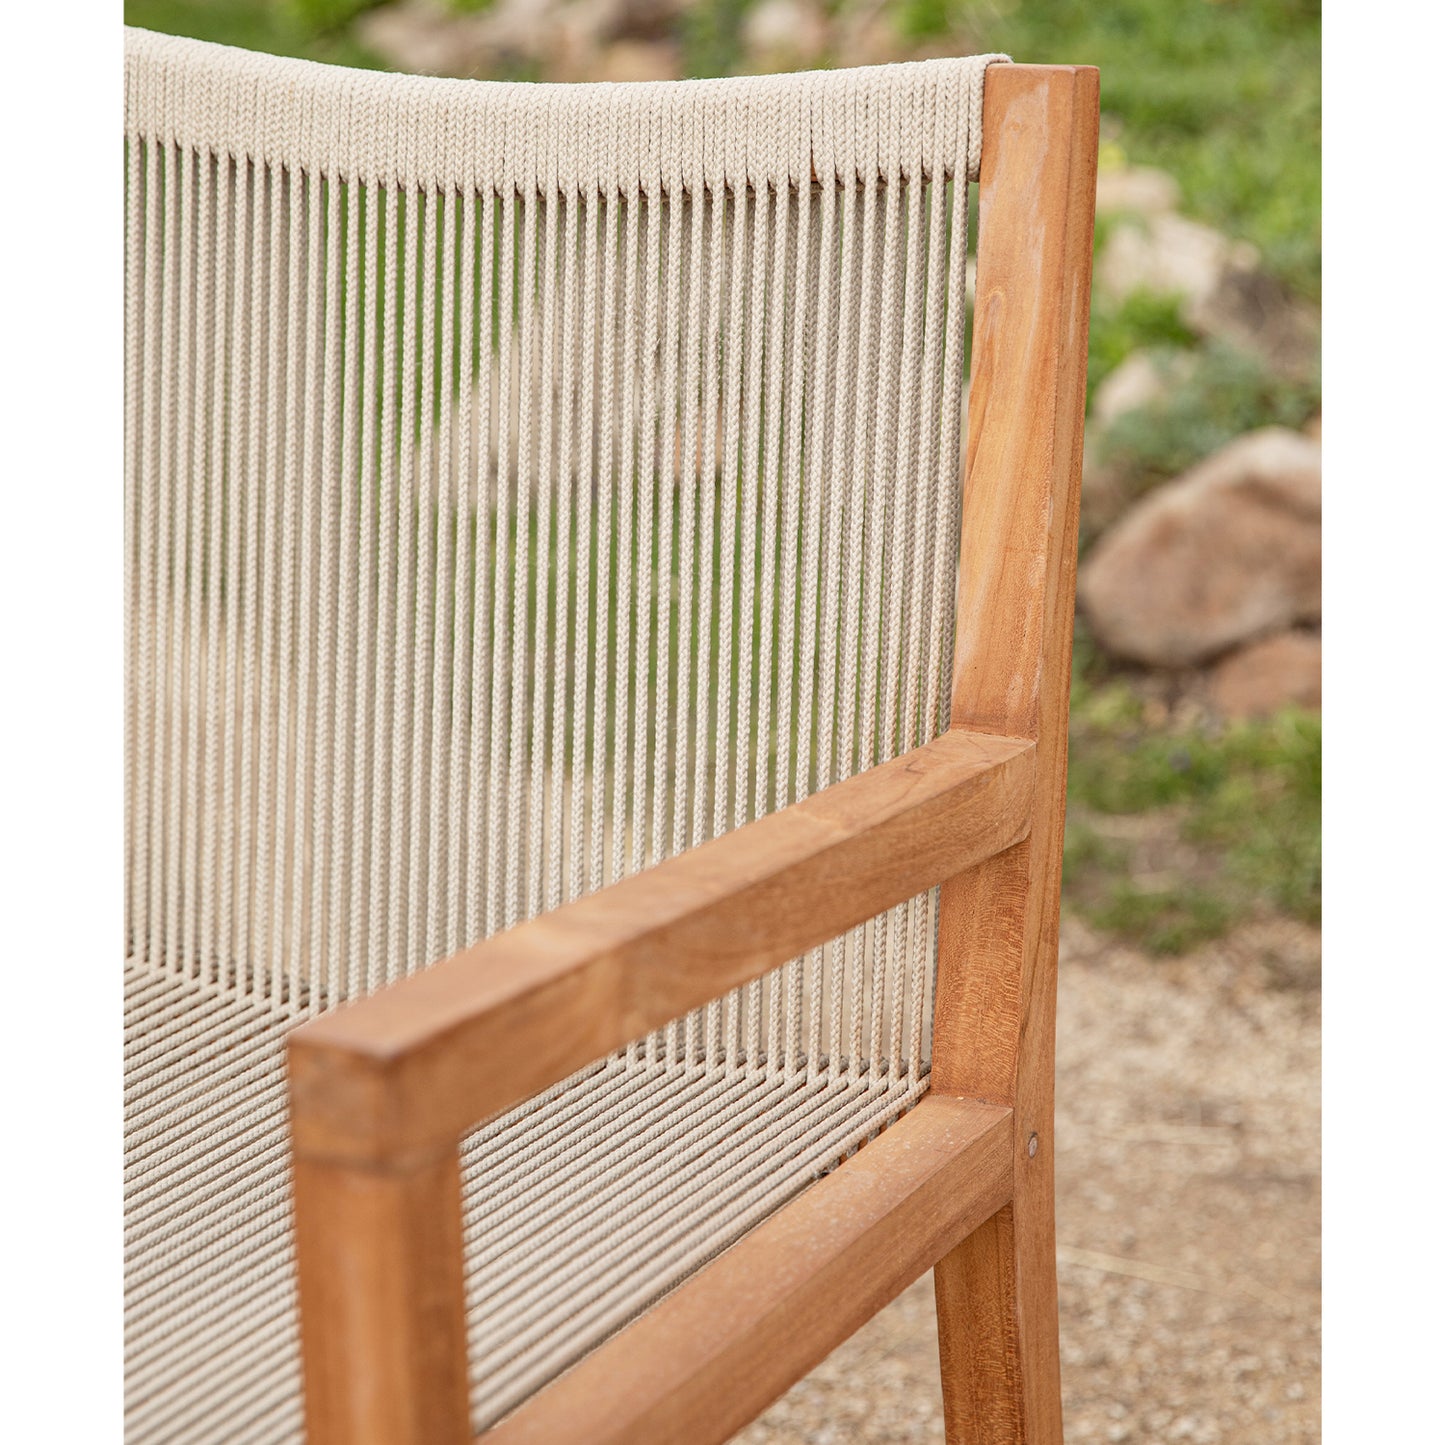 Pair of Mylor Outdoor Arm Chairs in Natural Teak and Poly Rope by Garden Trading